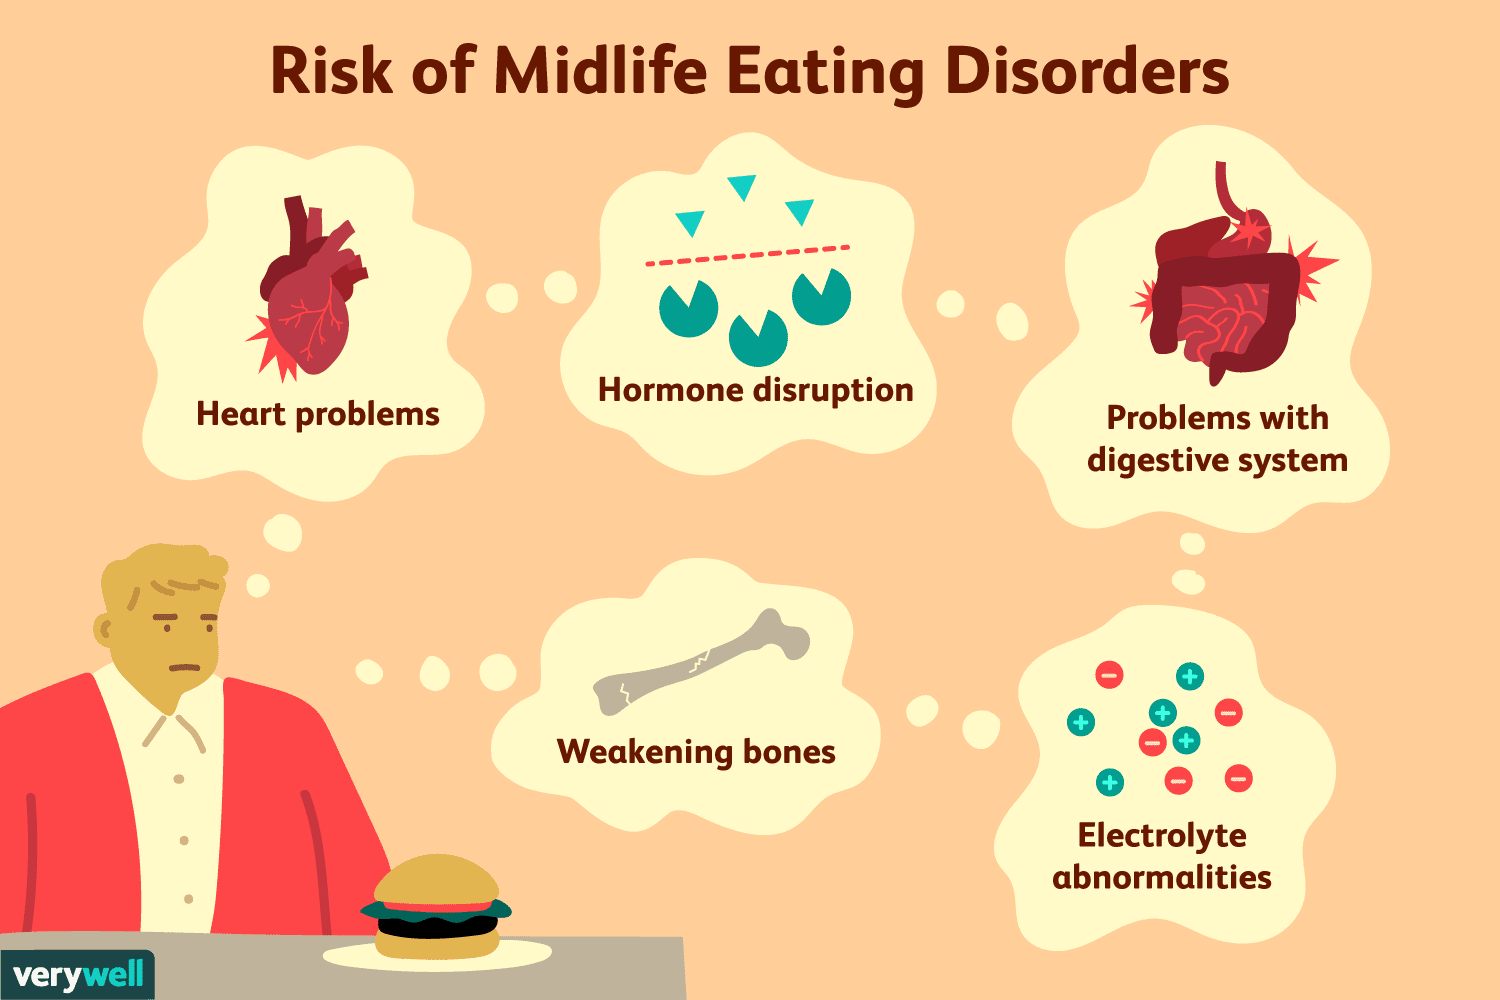 Midlife Eating Disorders: Presentation and Treatment